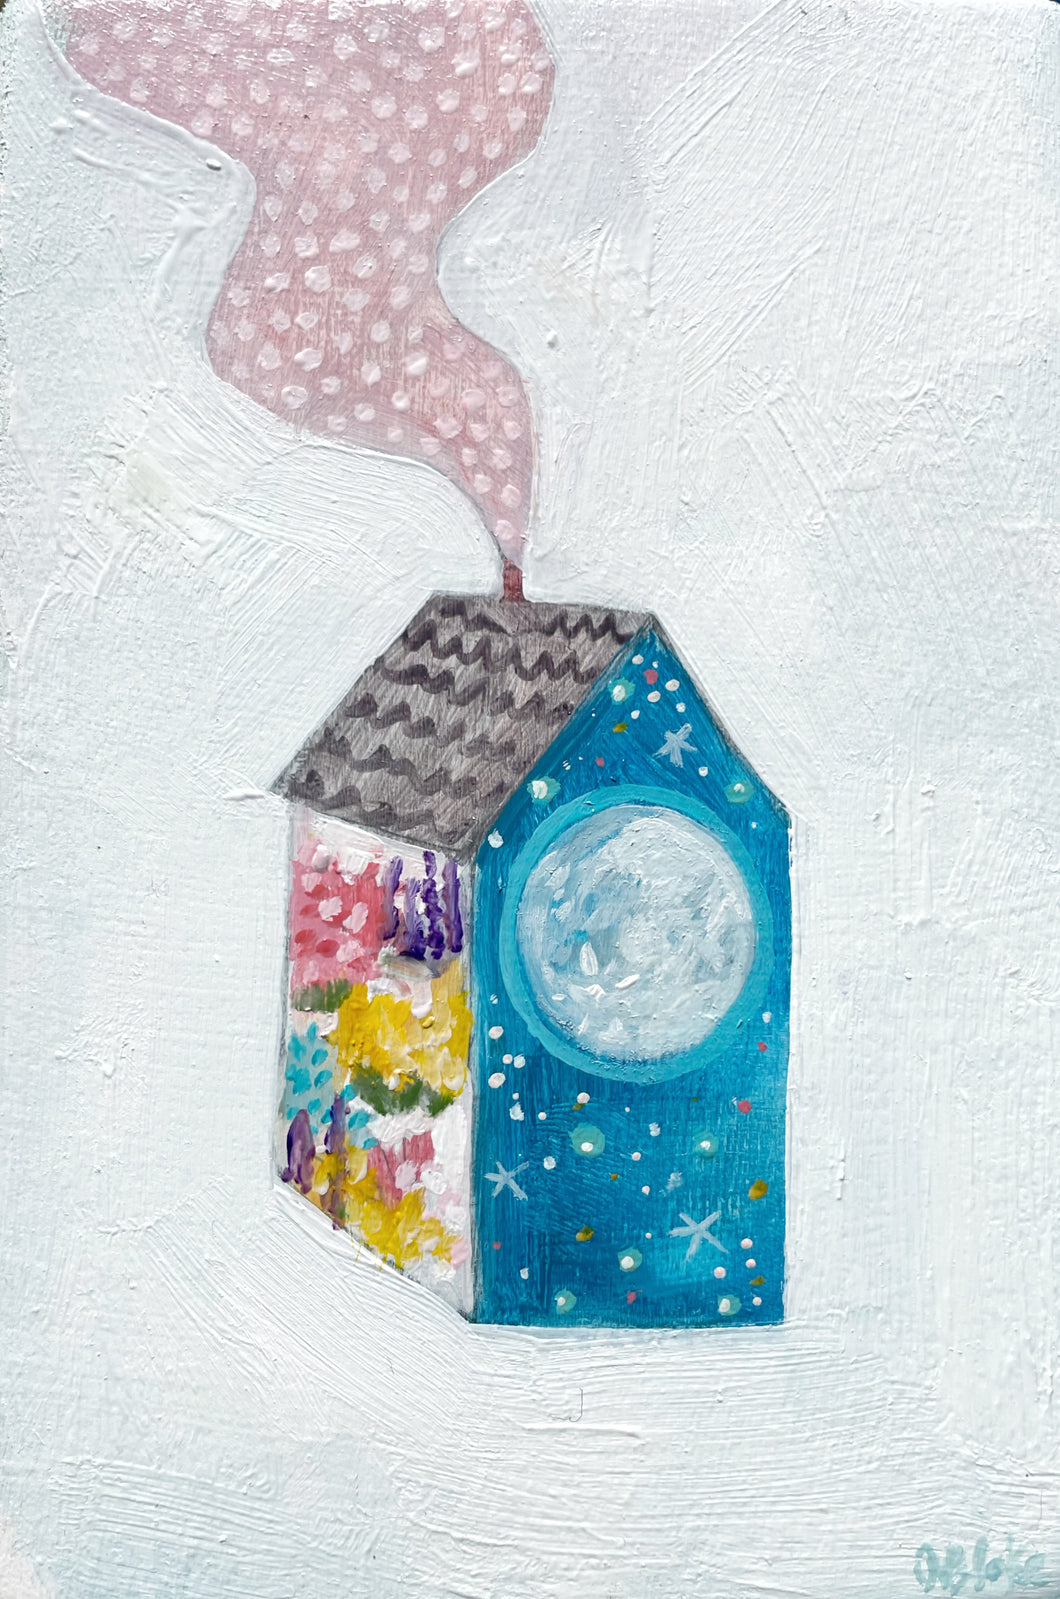 A home made of moonlight and wildflowers